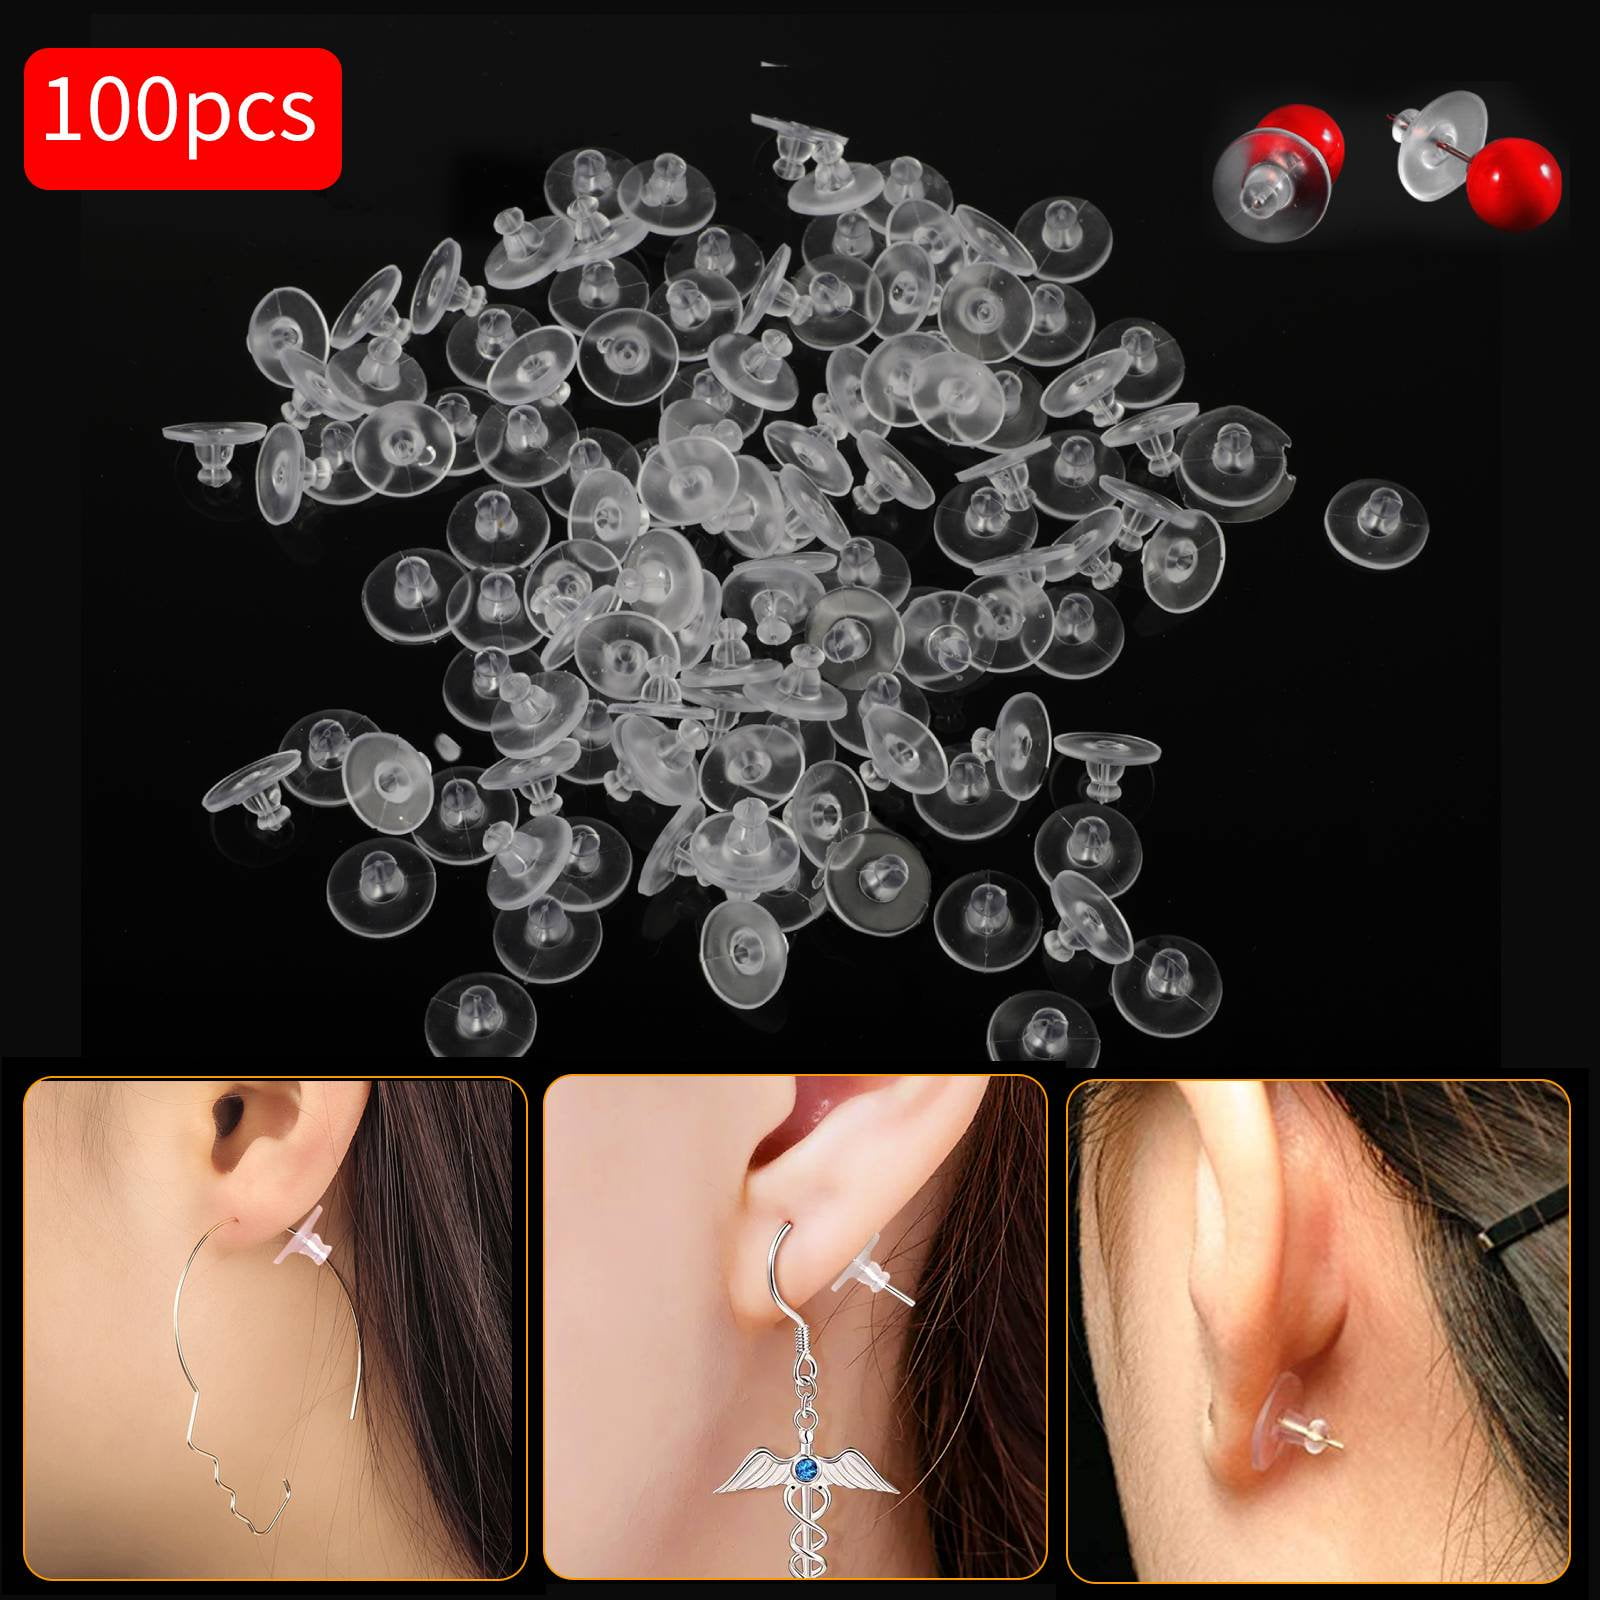 100pcs Silicone Earring Backs, EEEkit Soft Clear Earring Backings, Rubber  Ear Safety Back Pads Bullet Clutch Stopper Replacement, Hypoallergenic Earring  Backs for Fish Hook Earring Studs Hoops 